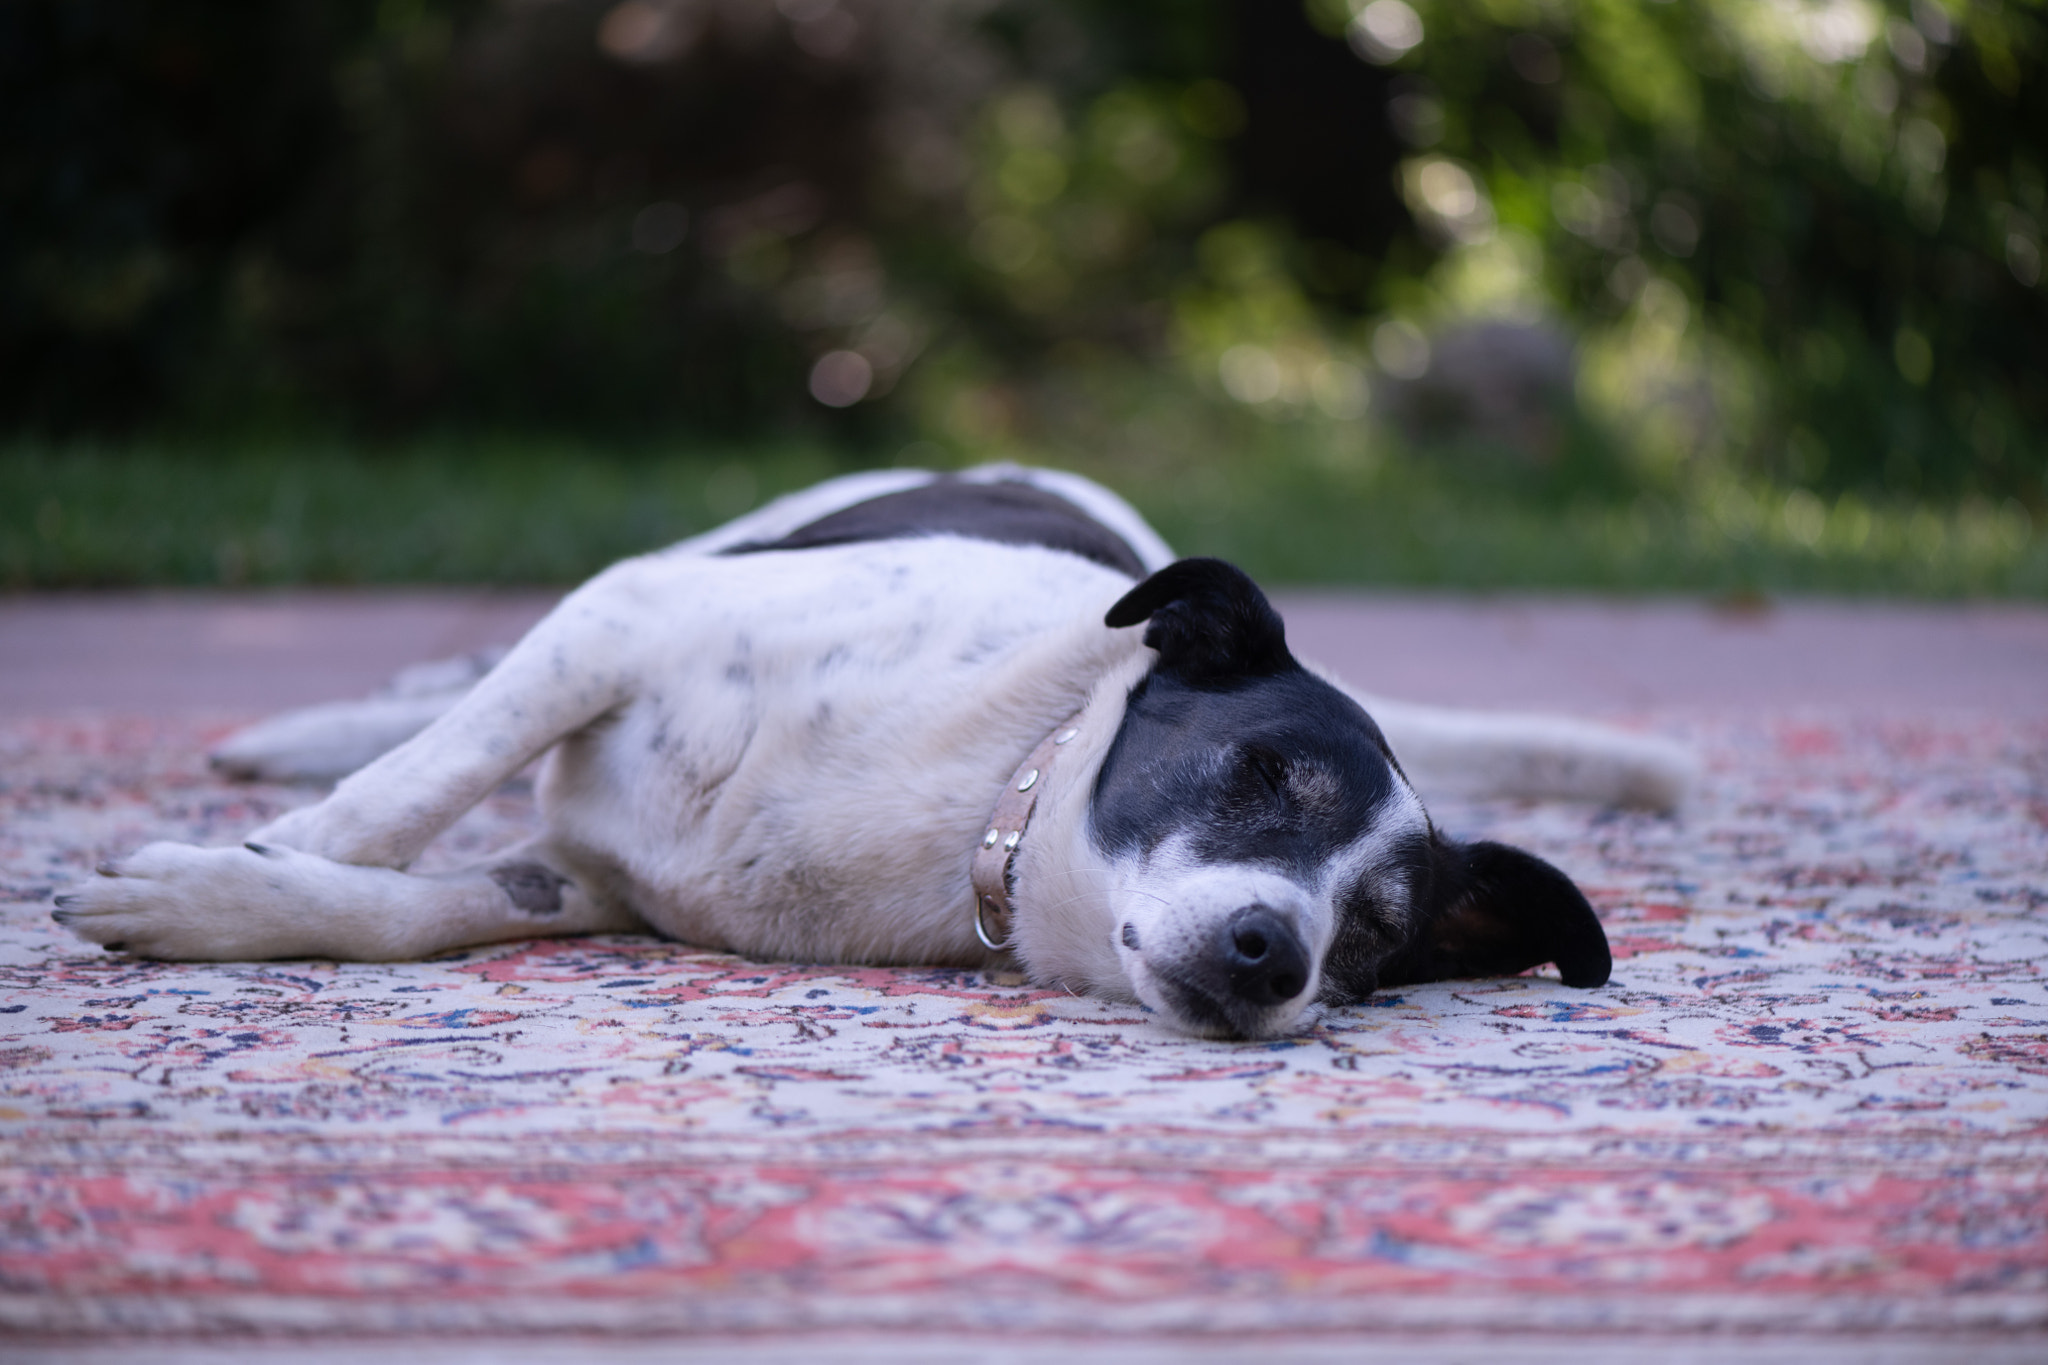 _DSC9238 Old dog sleeping on a rug in the garden